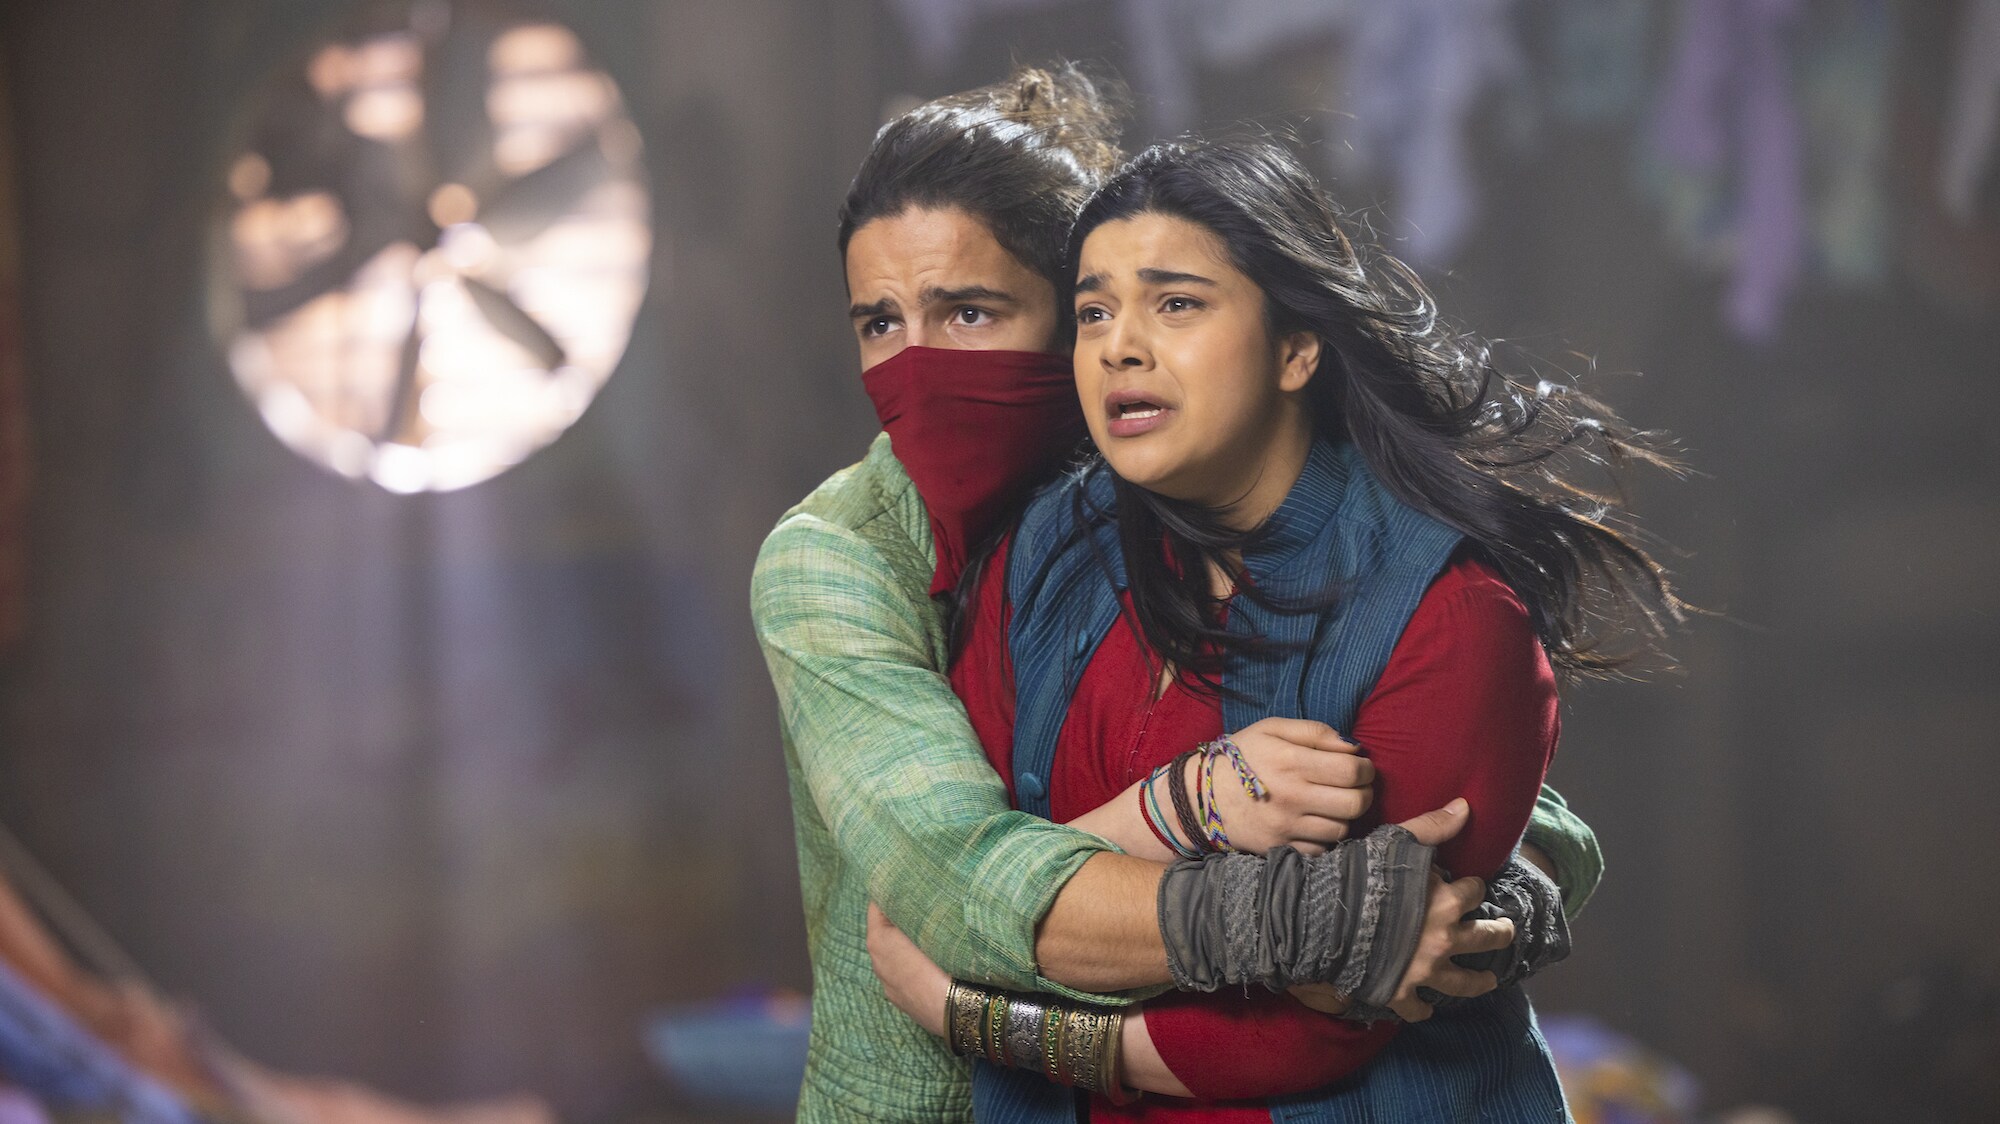 (L-R): Aramis Knight as Red Dagger/Kareem and Iman Vellani as Kamala Khan/Ms. Marvel in Marvel Studios' MS. MARVEL, exclusively on Disney+. Photo by Chuck Zlotnick. ©Marvel Studios 2022. All Rights Reserved.